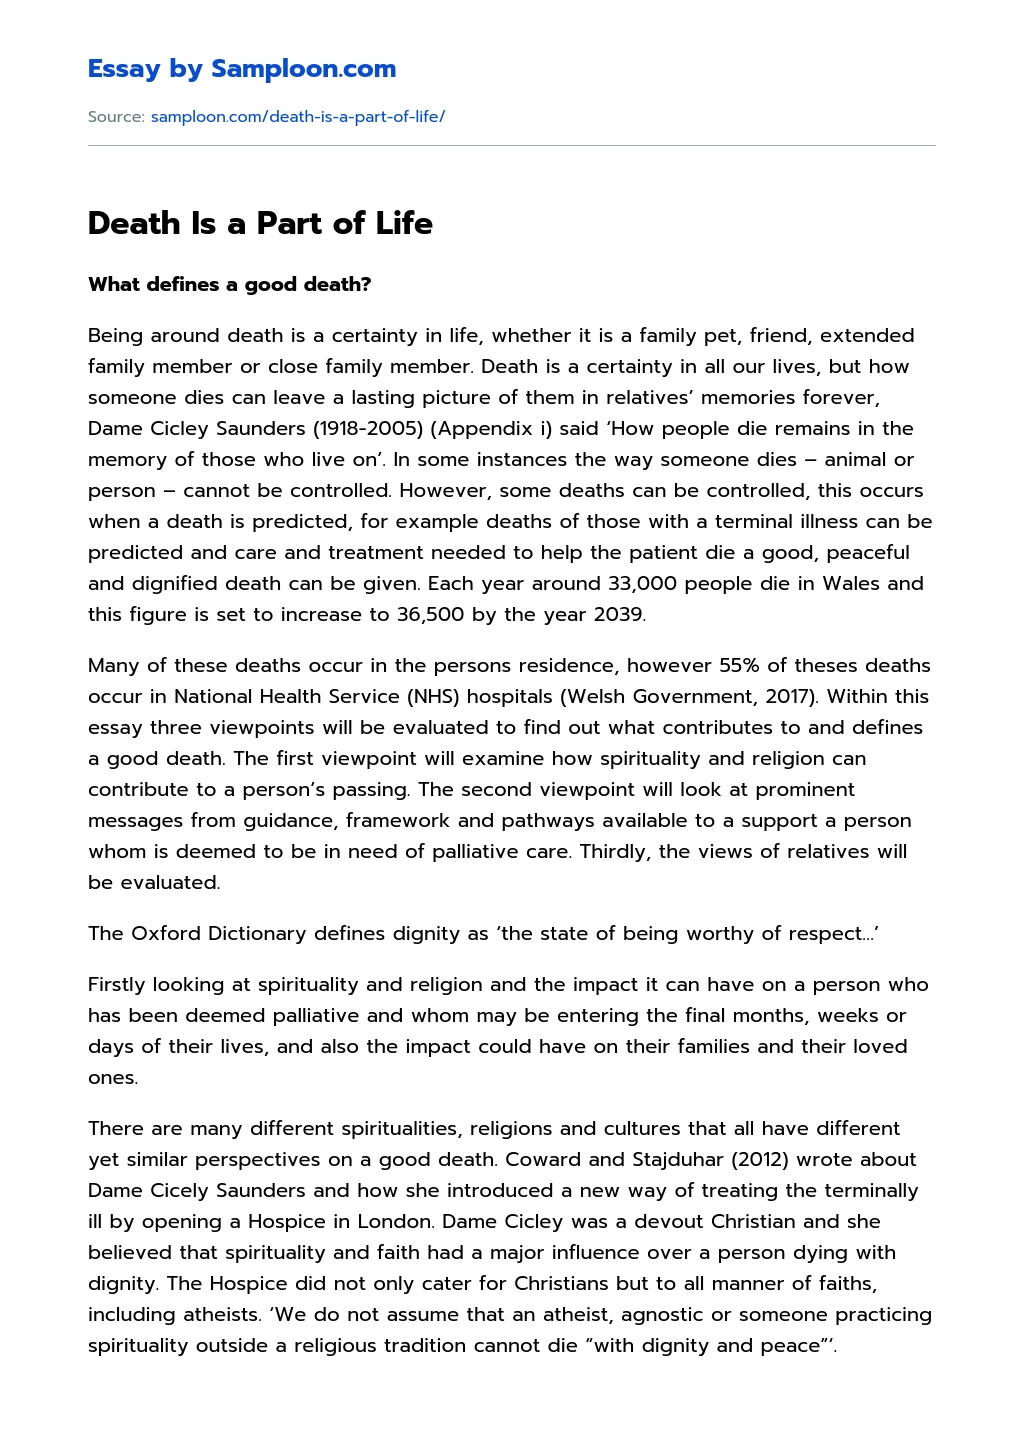 Death Is a Part of Life essay